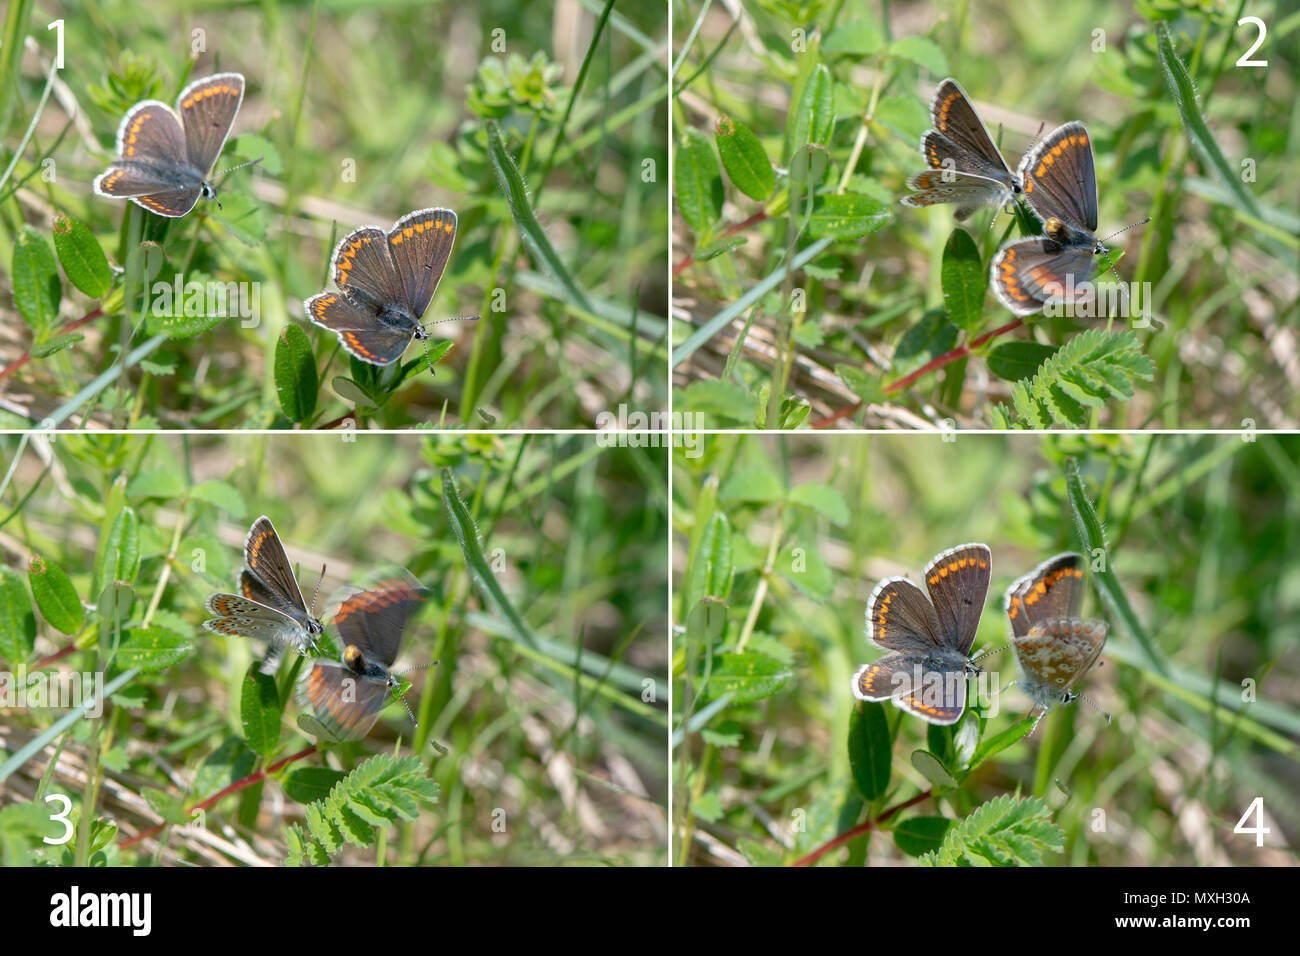 Mating sequence of brown argus (Aricia agestis) butterflies. Rapid series of shots of butterflies copulating in the family Lycaenidae, from arrival Stock Photo